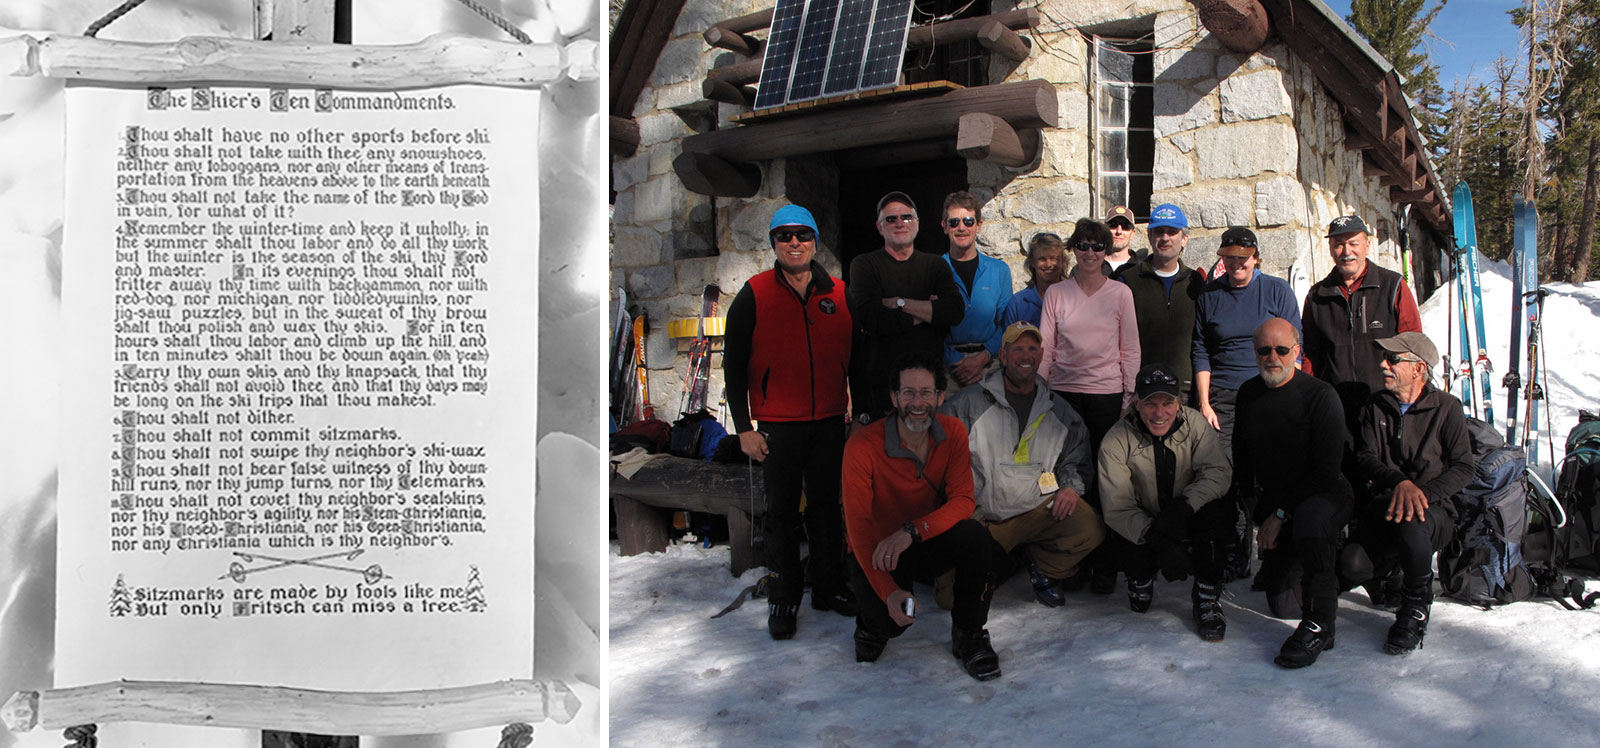 Left image: Historic photo of the Skier's Ten Commandments; Right image: Modern day photo of the Winter Club at the Ostrander Ski Hut.